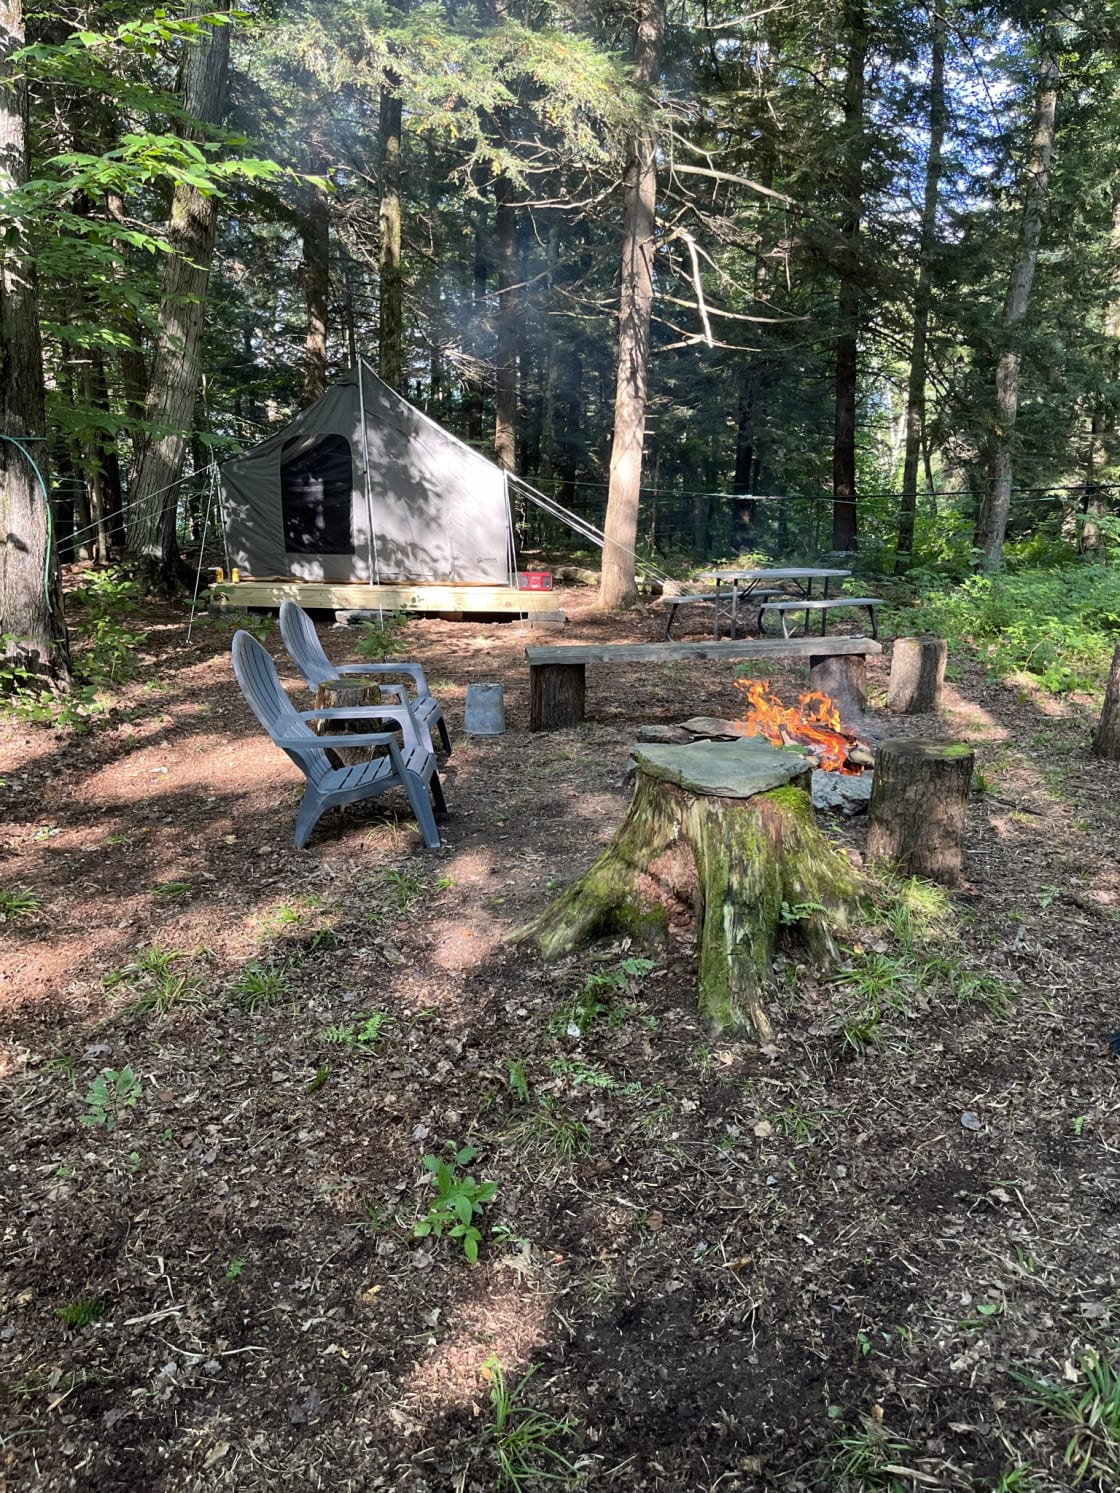 Basecamp-  Fire pit, outhouse and waterproof 4 season canvas tent. 
Plenty of fallen wood for fires, can purchase bundles of wood for an additional fee- cash or Venmo. 